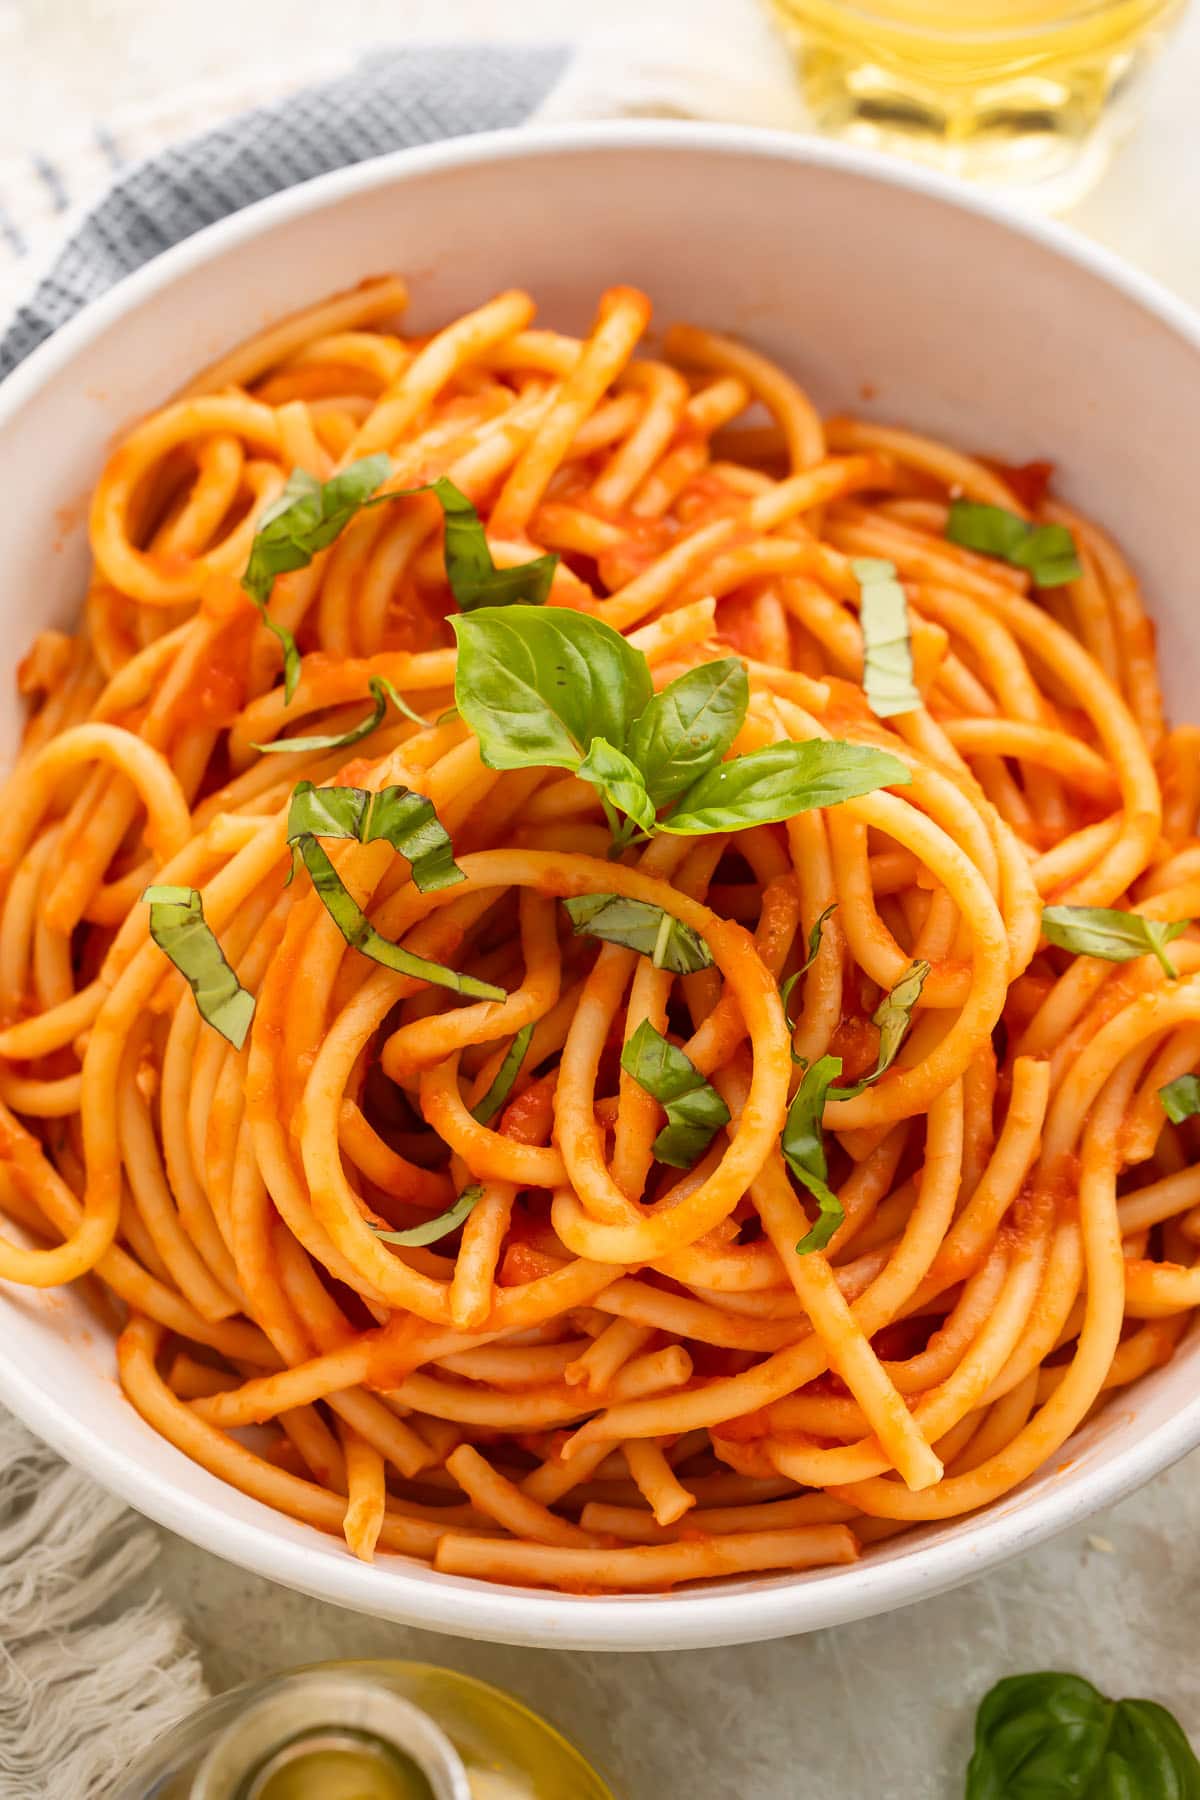 Close-up, overhead view of a white bowl of spaghetti swirled with red pomodoro sauce and topped with fresh basil leaves.